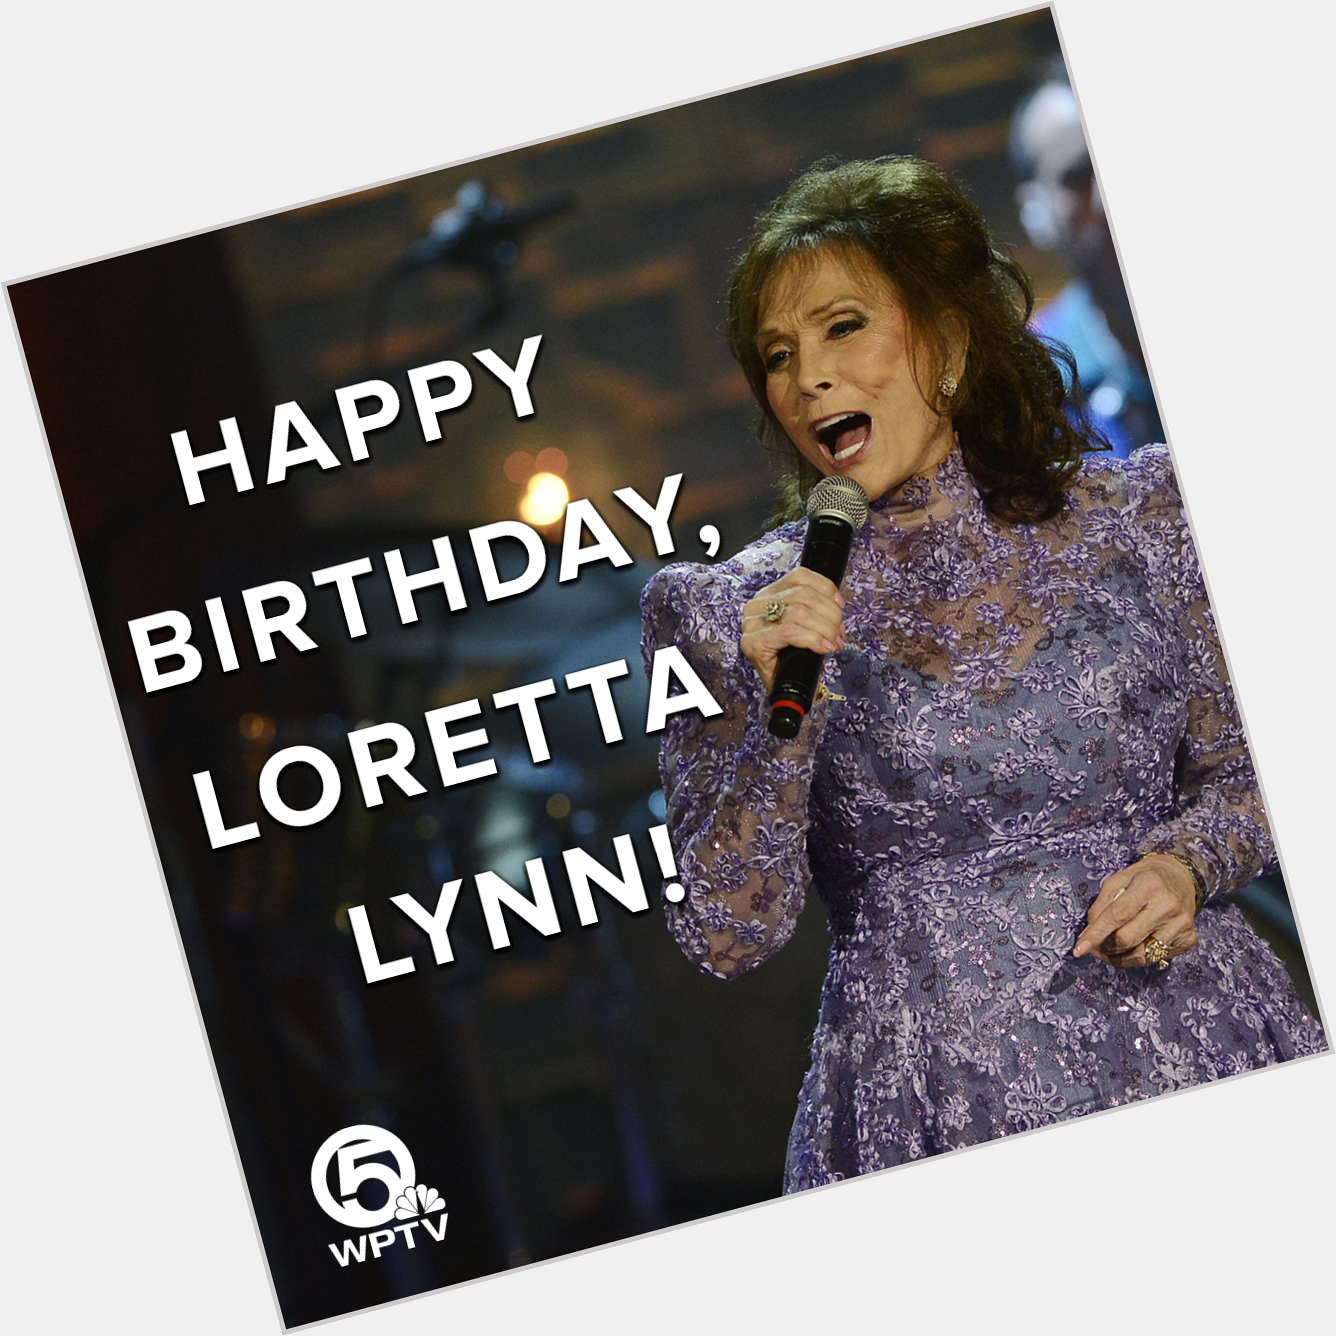 Happy Birthday to the \"Coal Miner\s Daughter\" Loretta Lynn! The country music legend turns 88 today. 